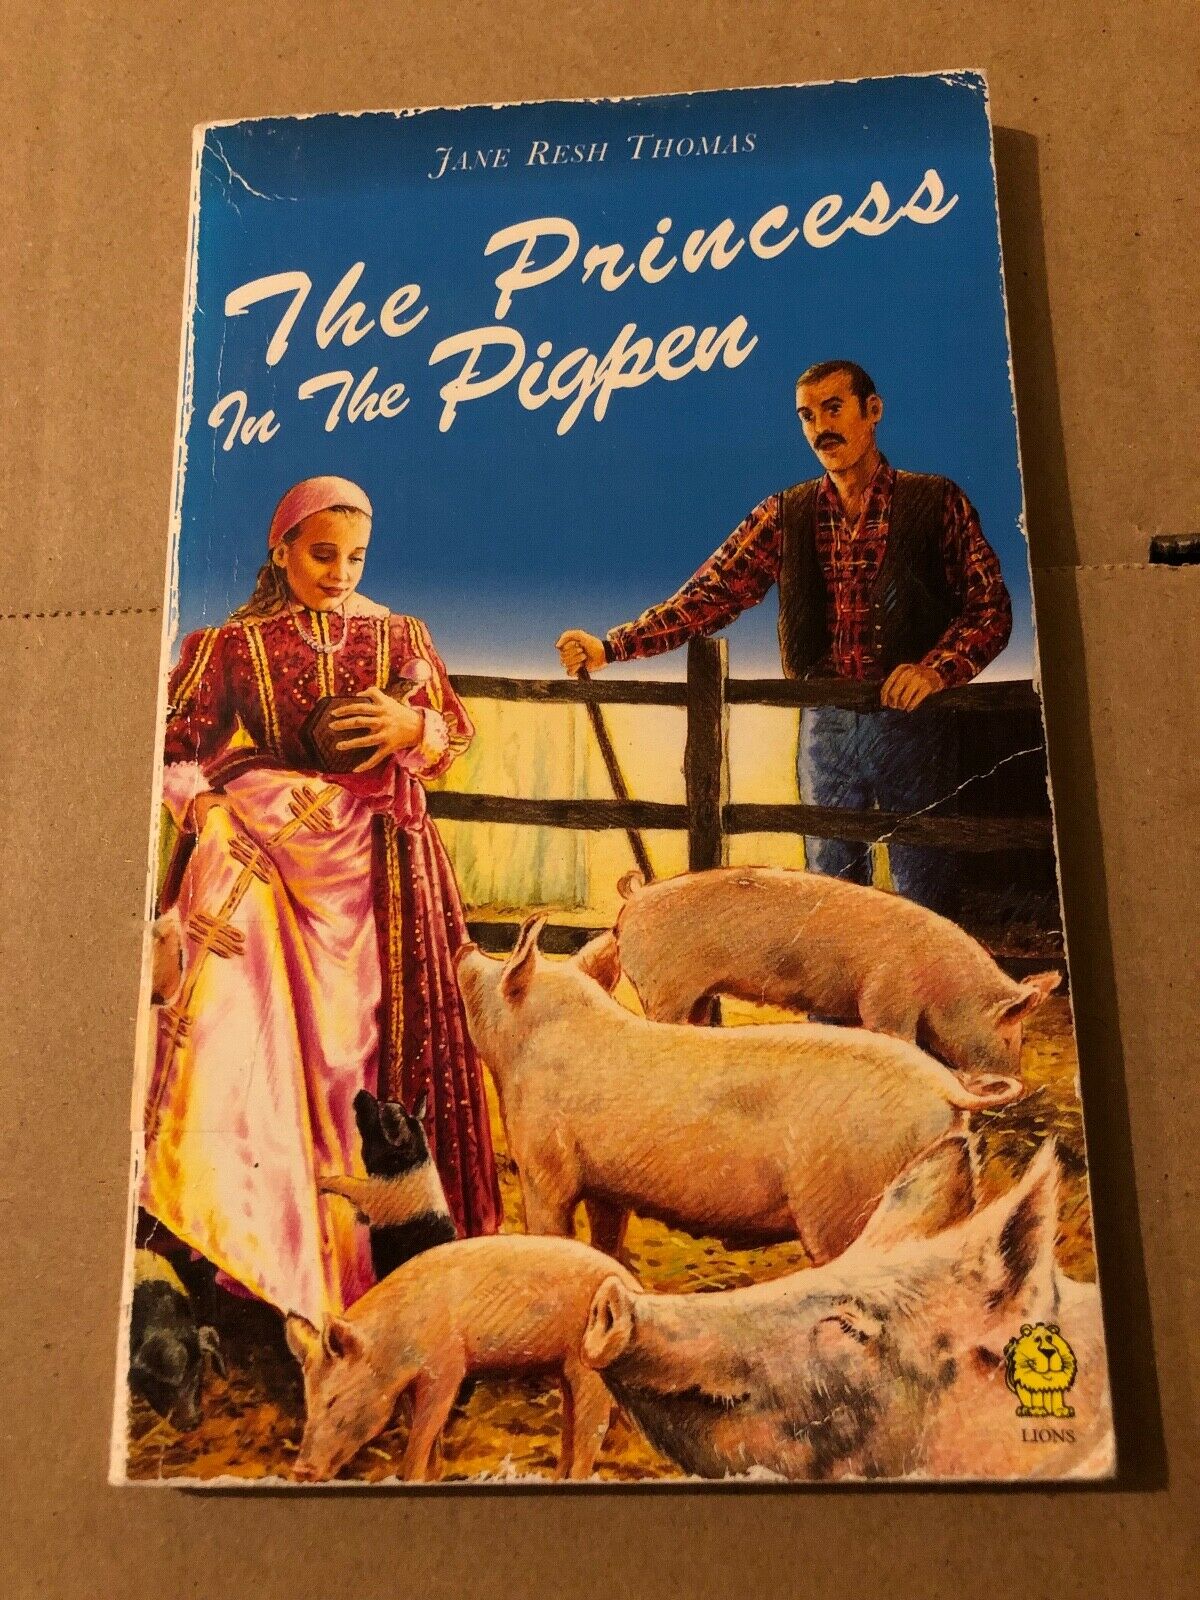 The Princess in the Pigpen by Jane Resh Thomas (Paperback, 1993)